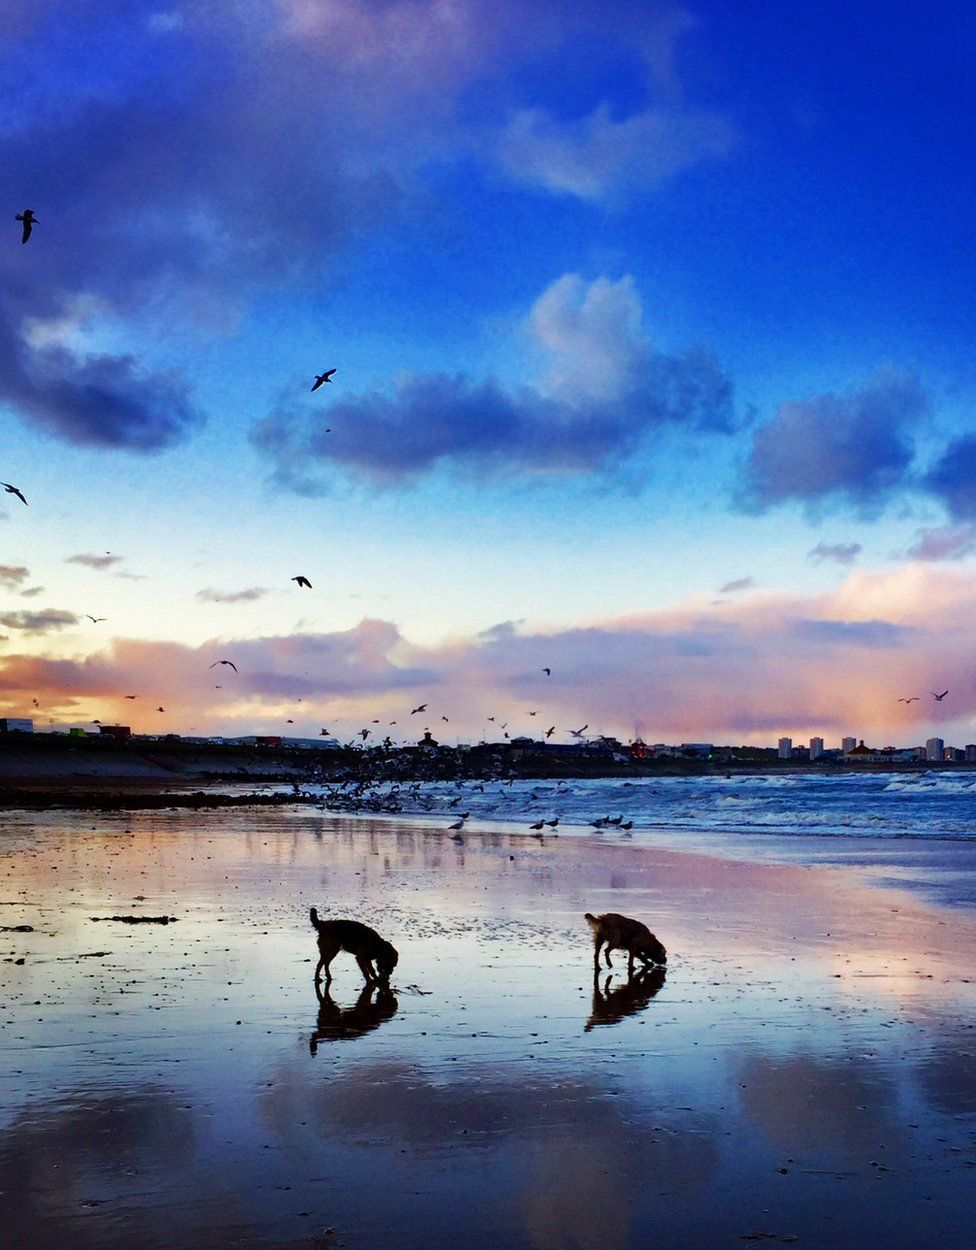 A shot of Footdee beach with 2 dogs and birds in the water